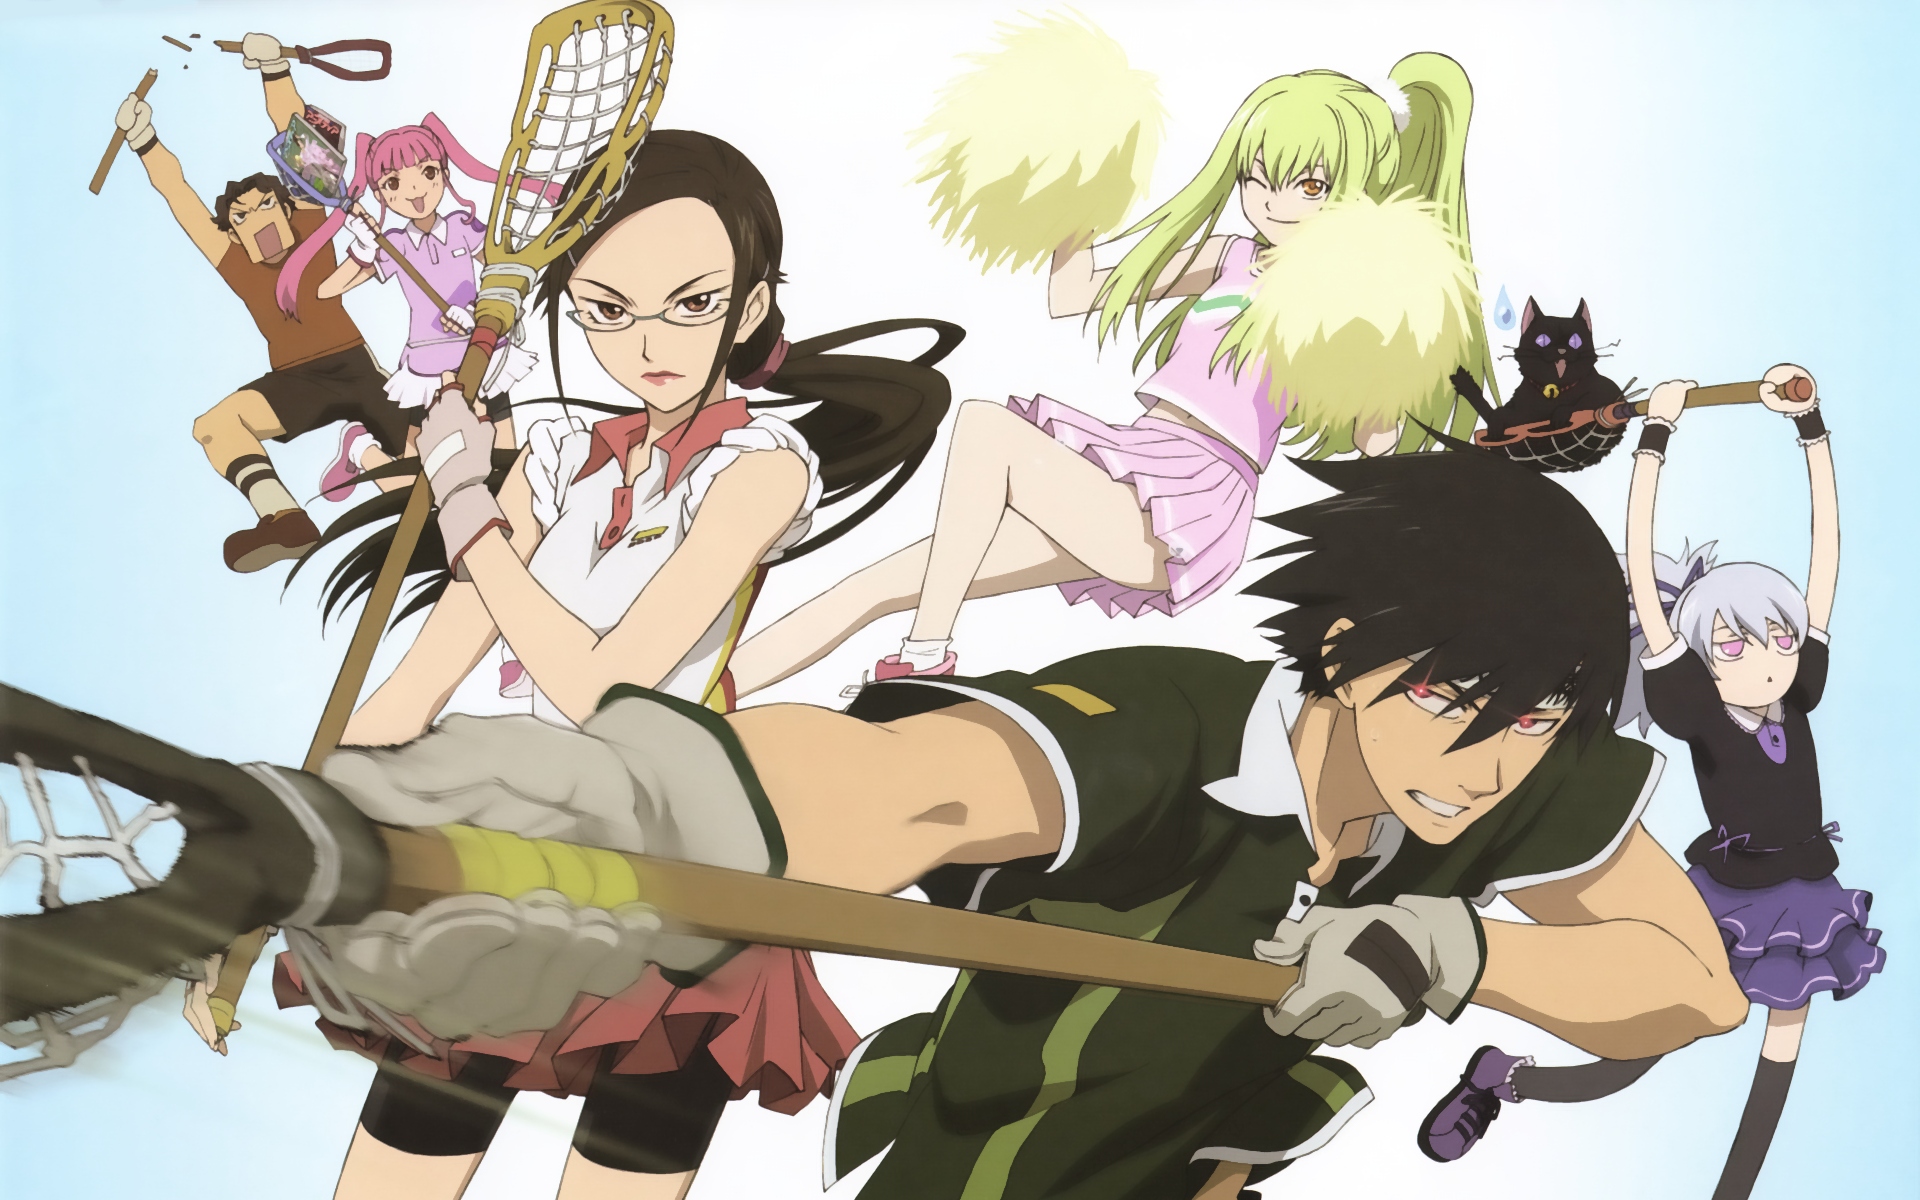 Characters from the anime Darker Than Black: Misaki, Amber, Hei, Mao, and Yin. Desktop wallpaper.